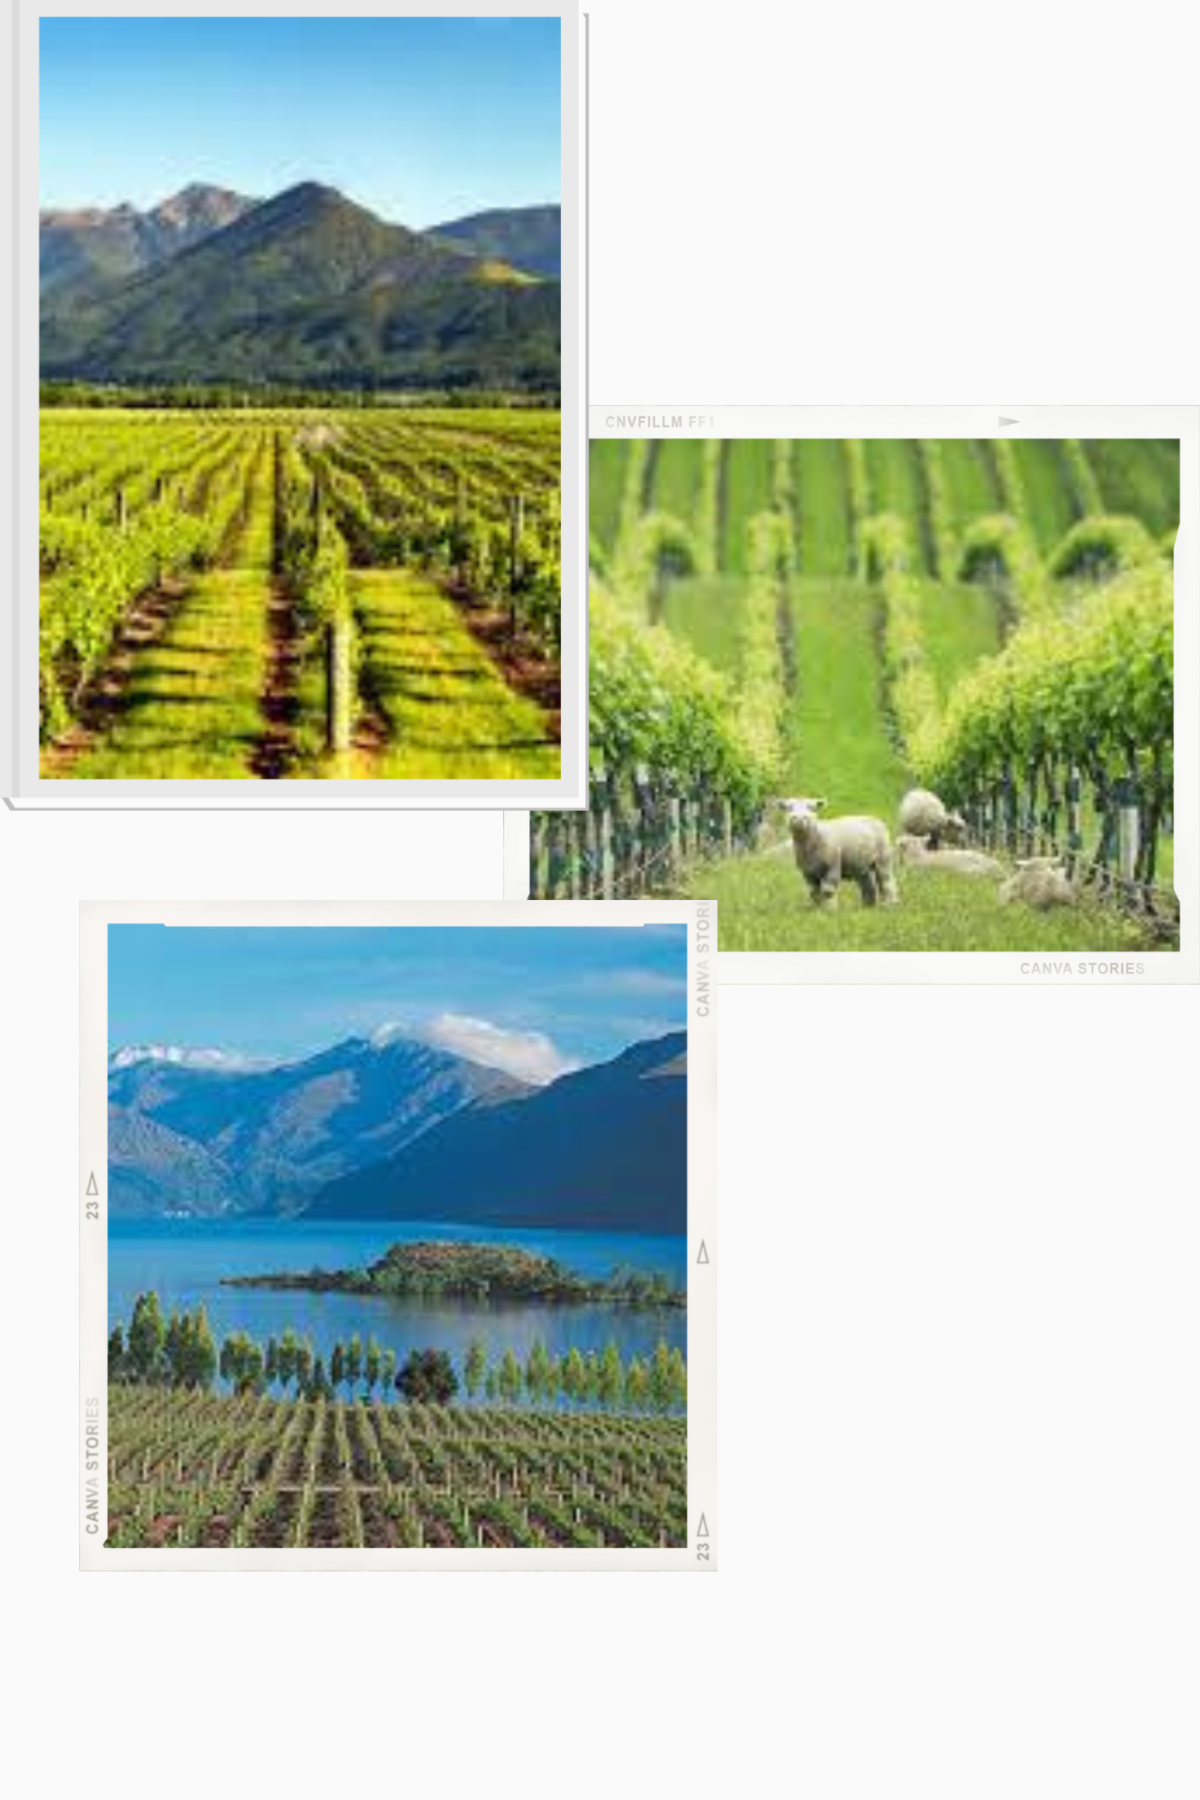 New Zealand Winegrowers highlight “white wine” for the month of May